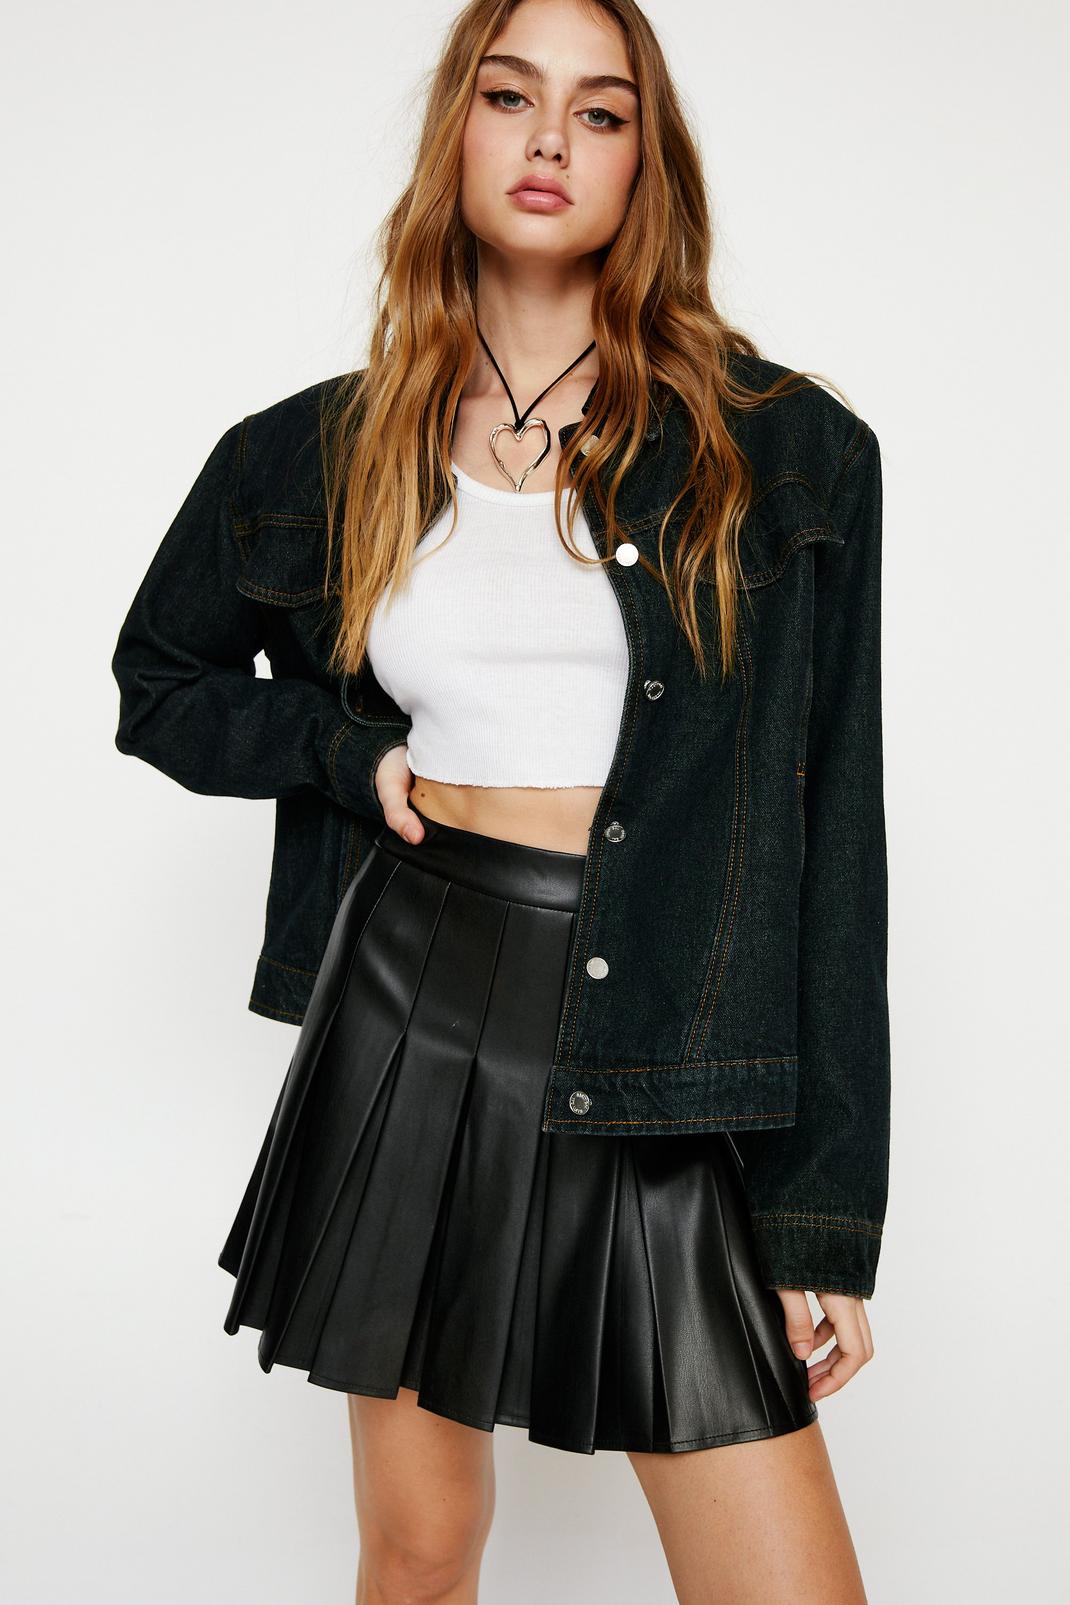 party look black leather skater skirt blouse